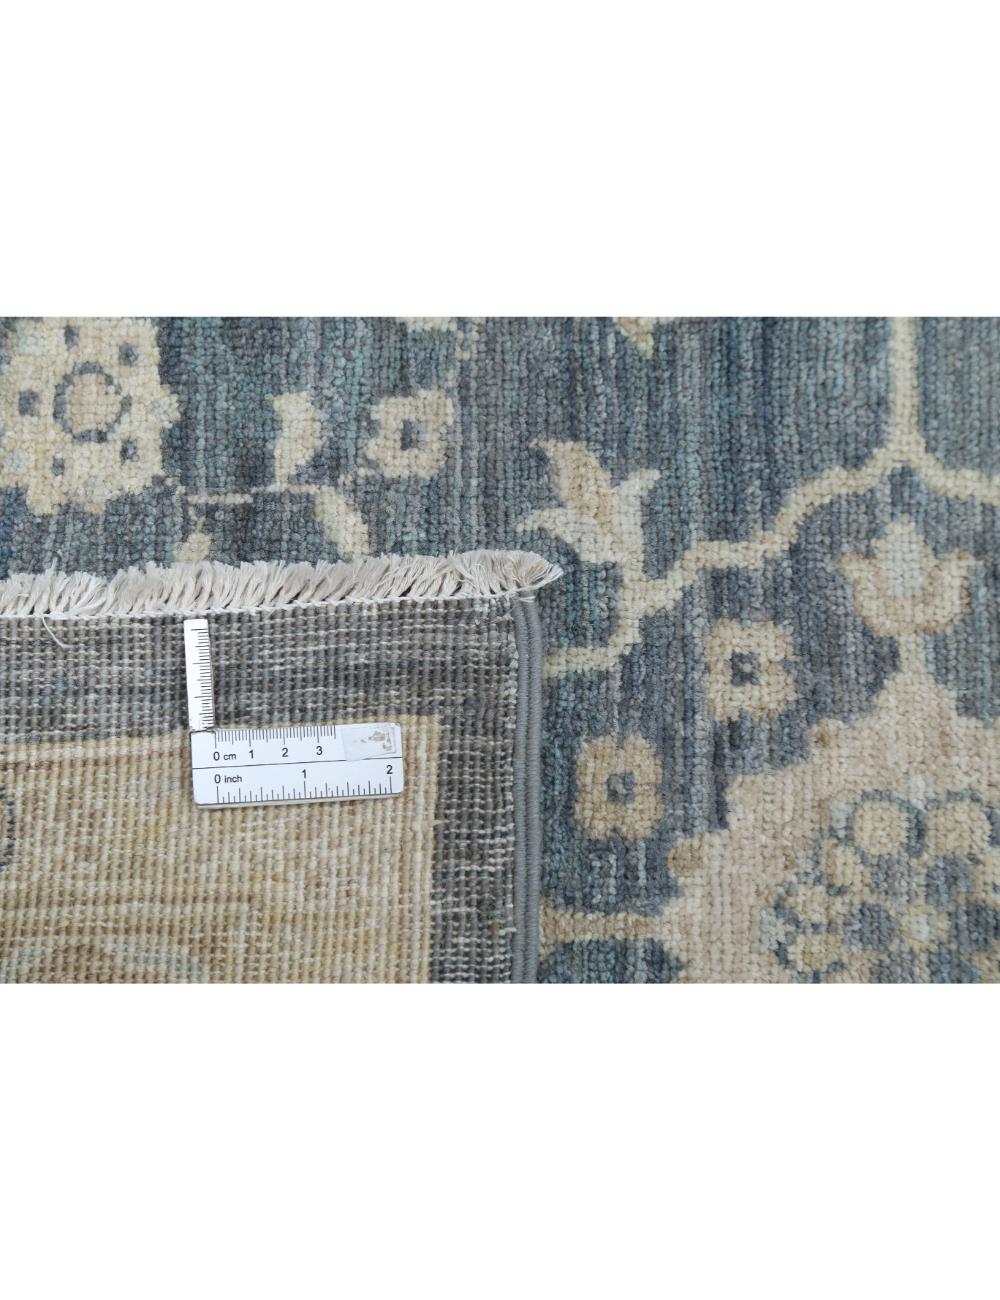 Serenity 9' 9" X 23' 8" Hand-Knotted Wool Rug 9' 9" X 23' 8" (297 X 721) / Blue / Ivory